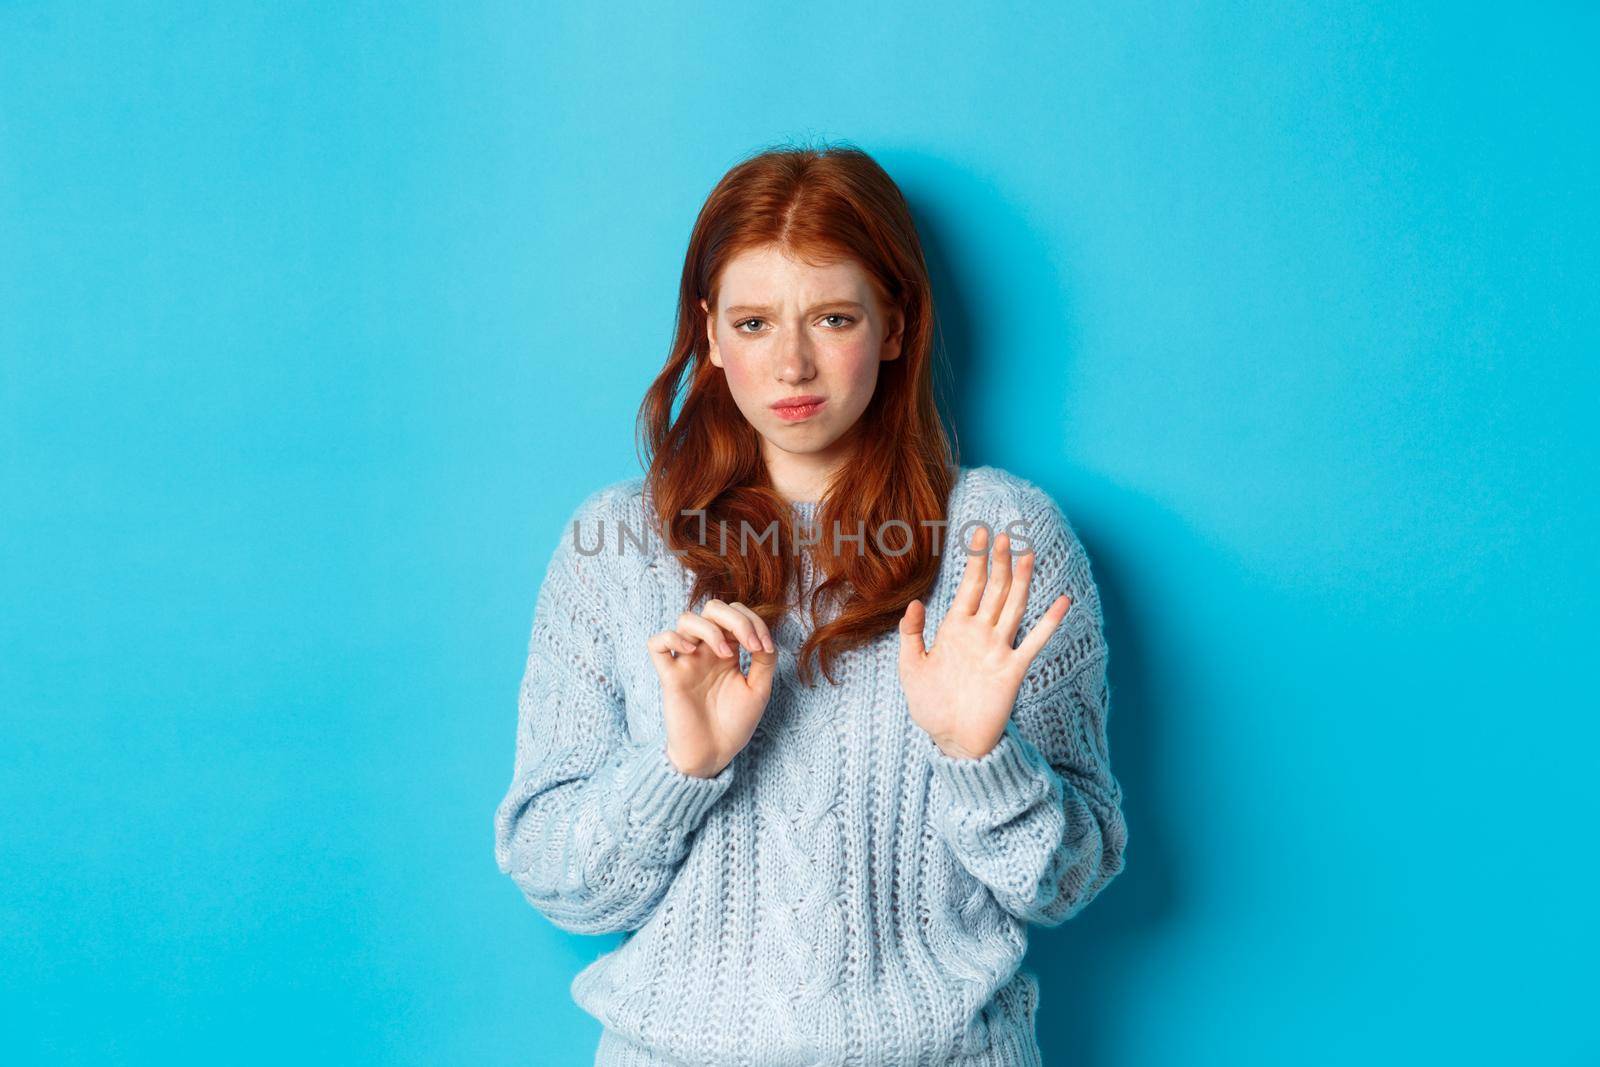 Reluctant redhead girl asking to stay away, shaking hand in rejection gesture, decline offer and grimacing displeased, standing over blue background.